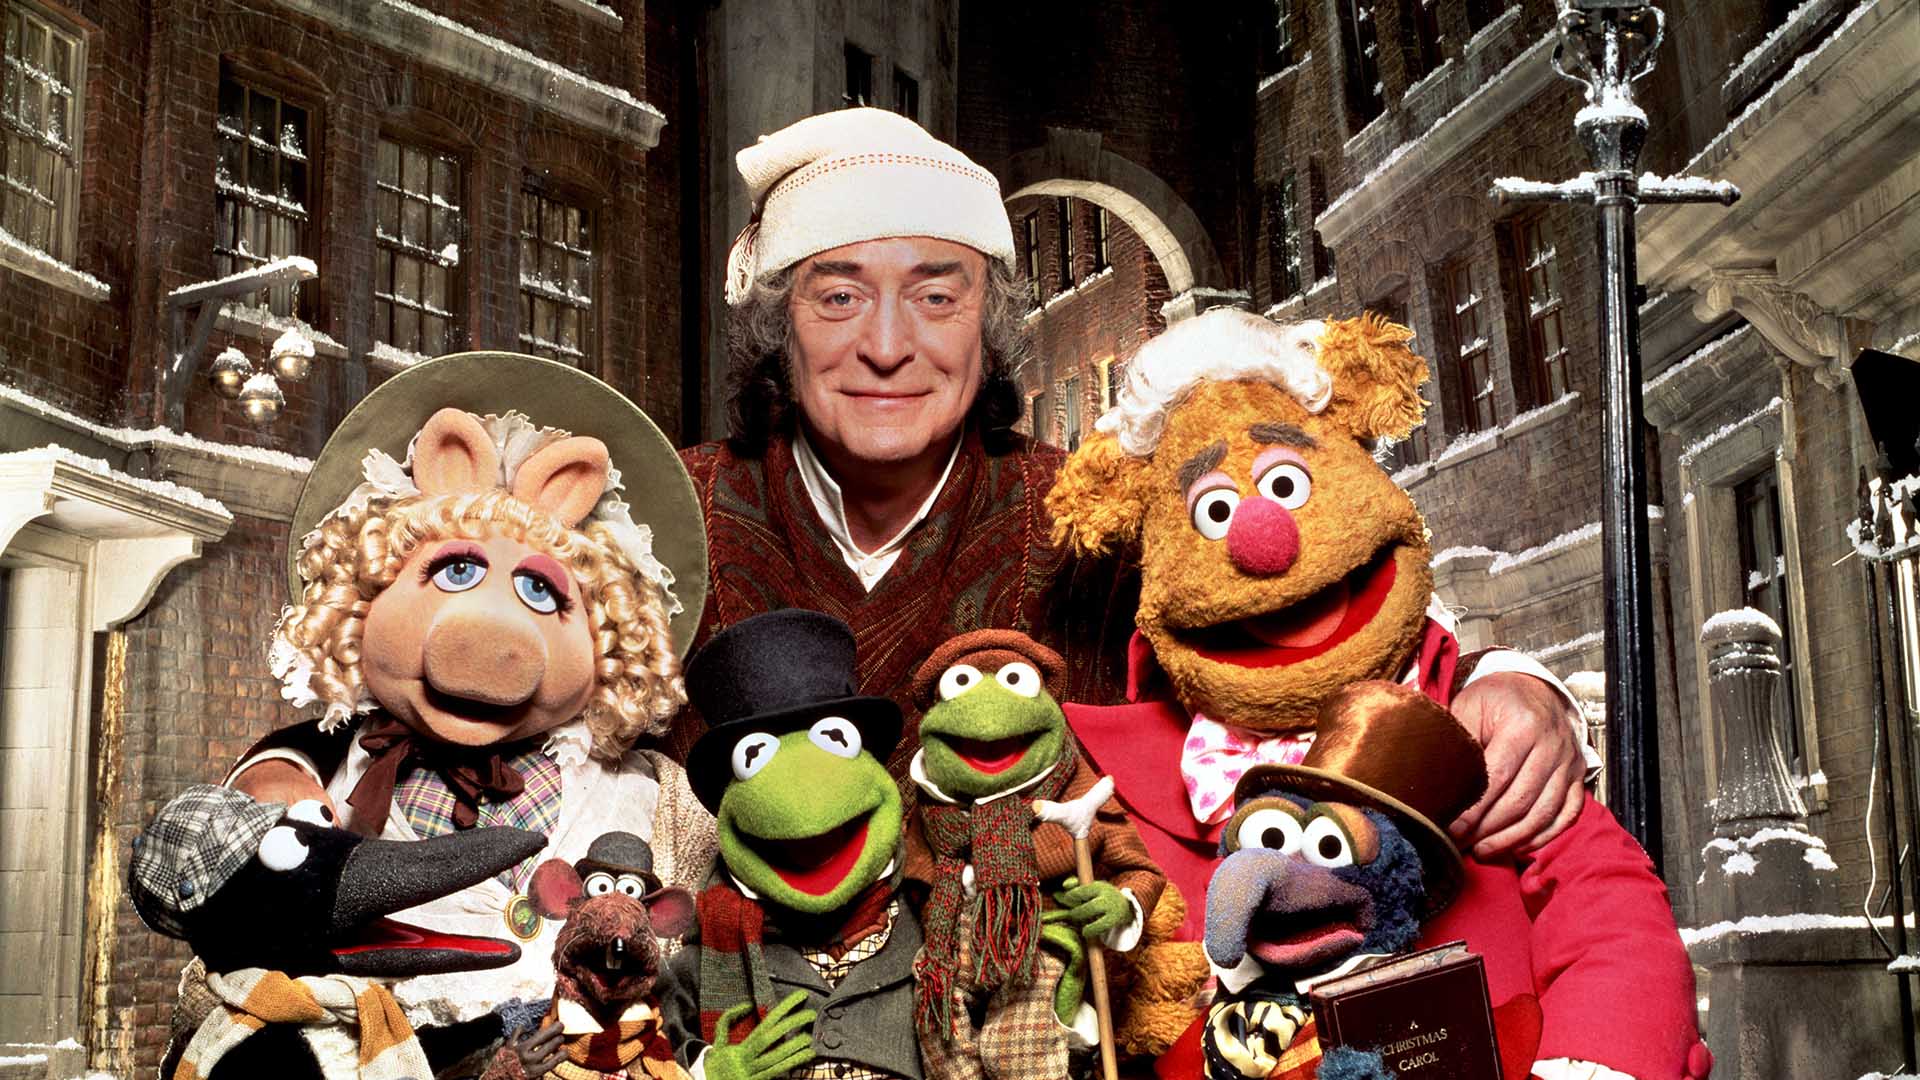 It's Time to Play the Music: You Can See 'The Muppet Christmas Carol' with a Live Orchestra This December